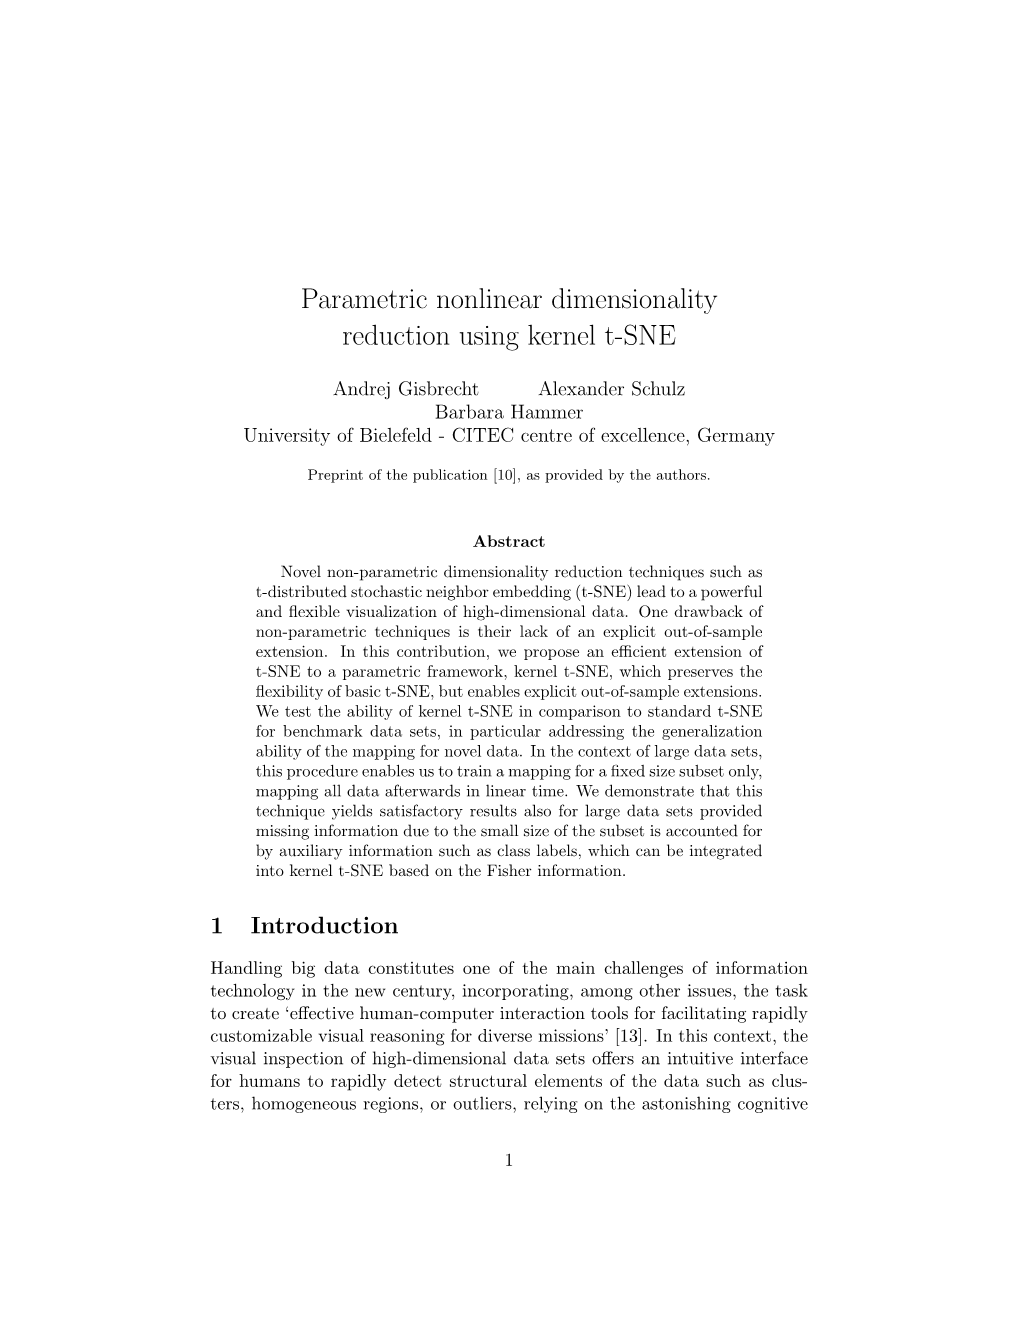 Parametric Nonlinear Dimensionality Reduction Using Kernel T-SNE